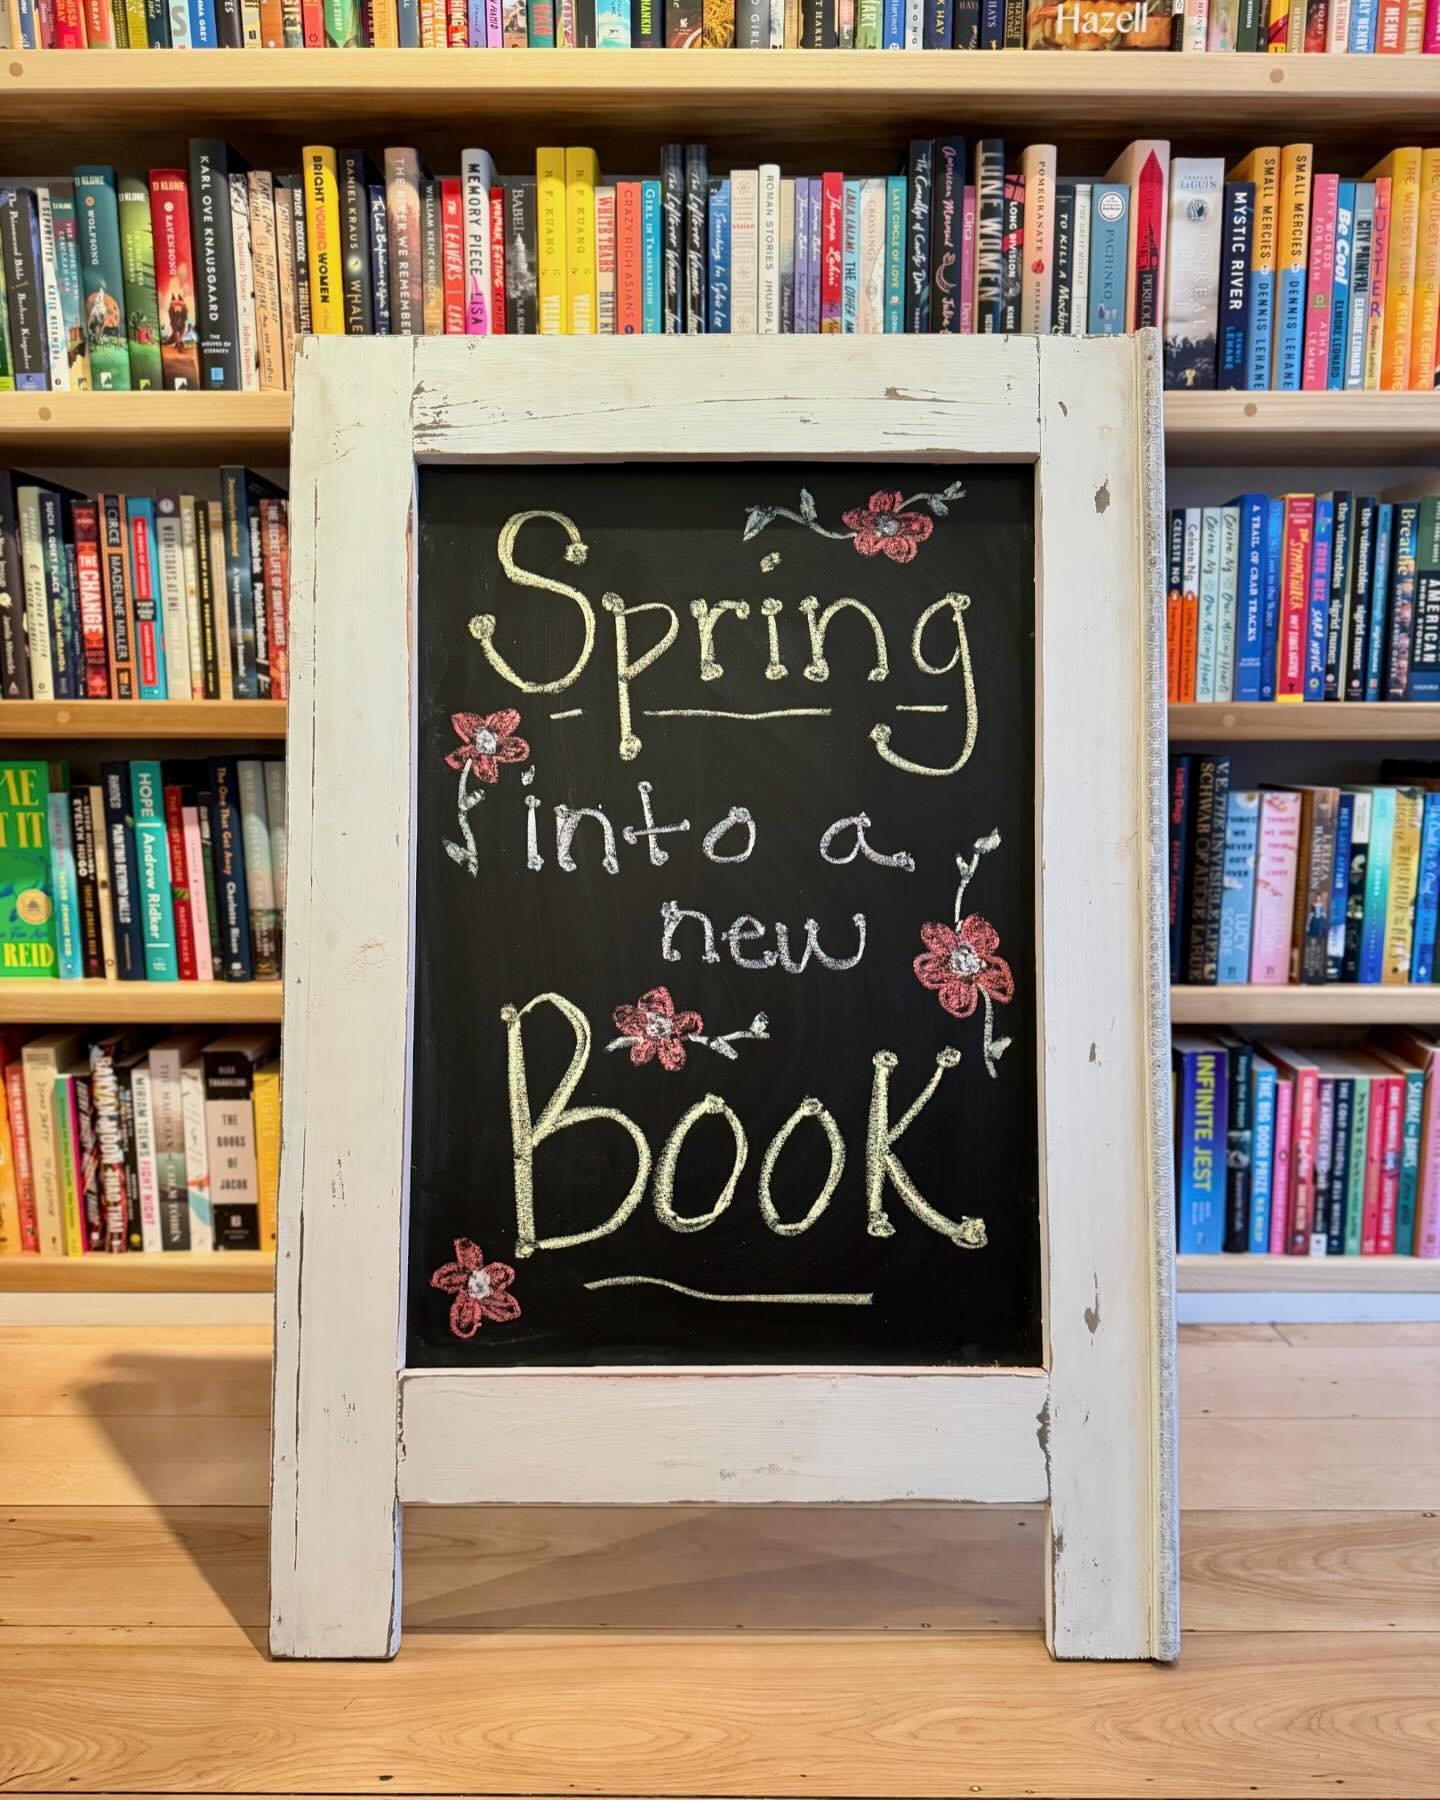 Celebrate the season 🌸

This is your sign to pick up a new book! It&rsquo;s a beautiful spring day to browse our shelves and discover your amazing next read. ☀️

Open 10:00-5:00, everyday! 📚

.
.
.
.
.
.
#marblehead #indiebookstore #itsasign #readm